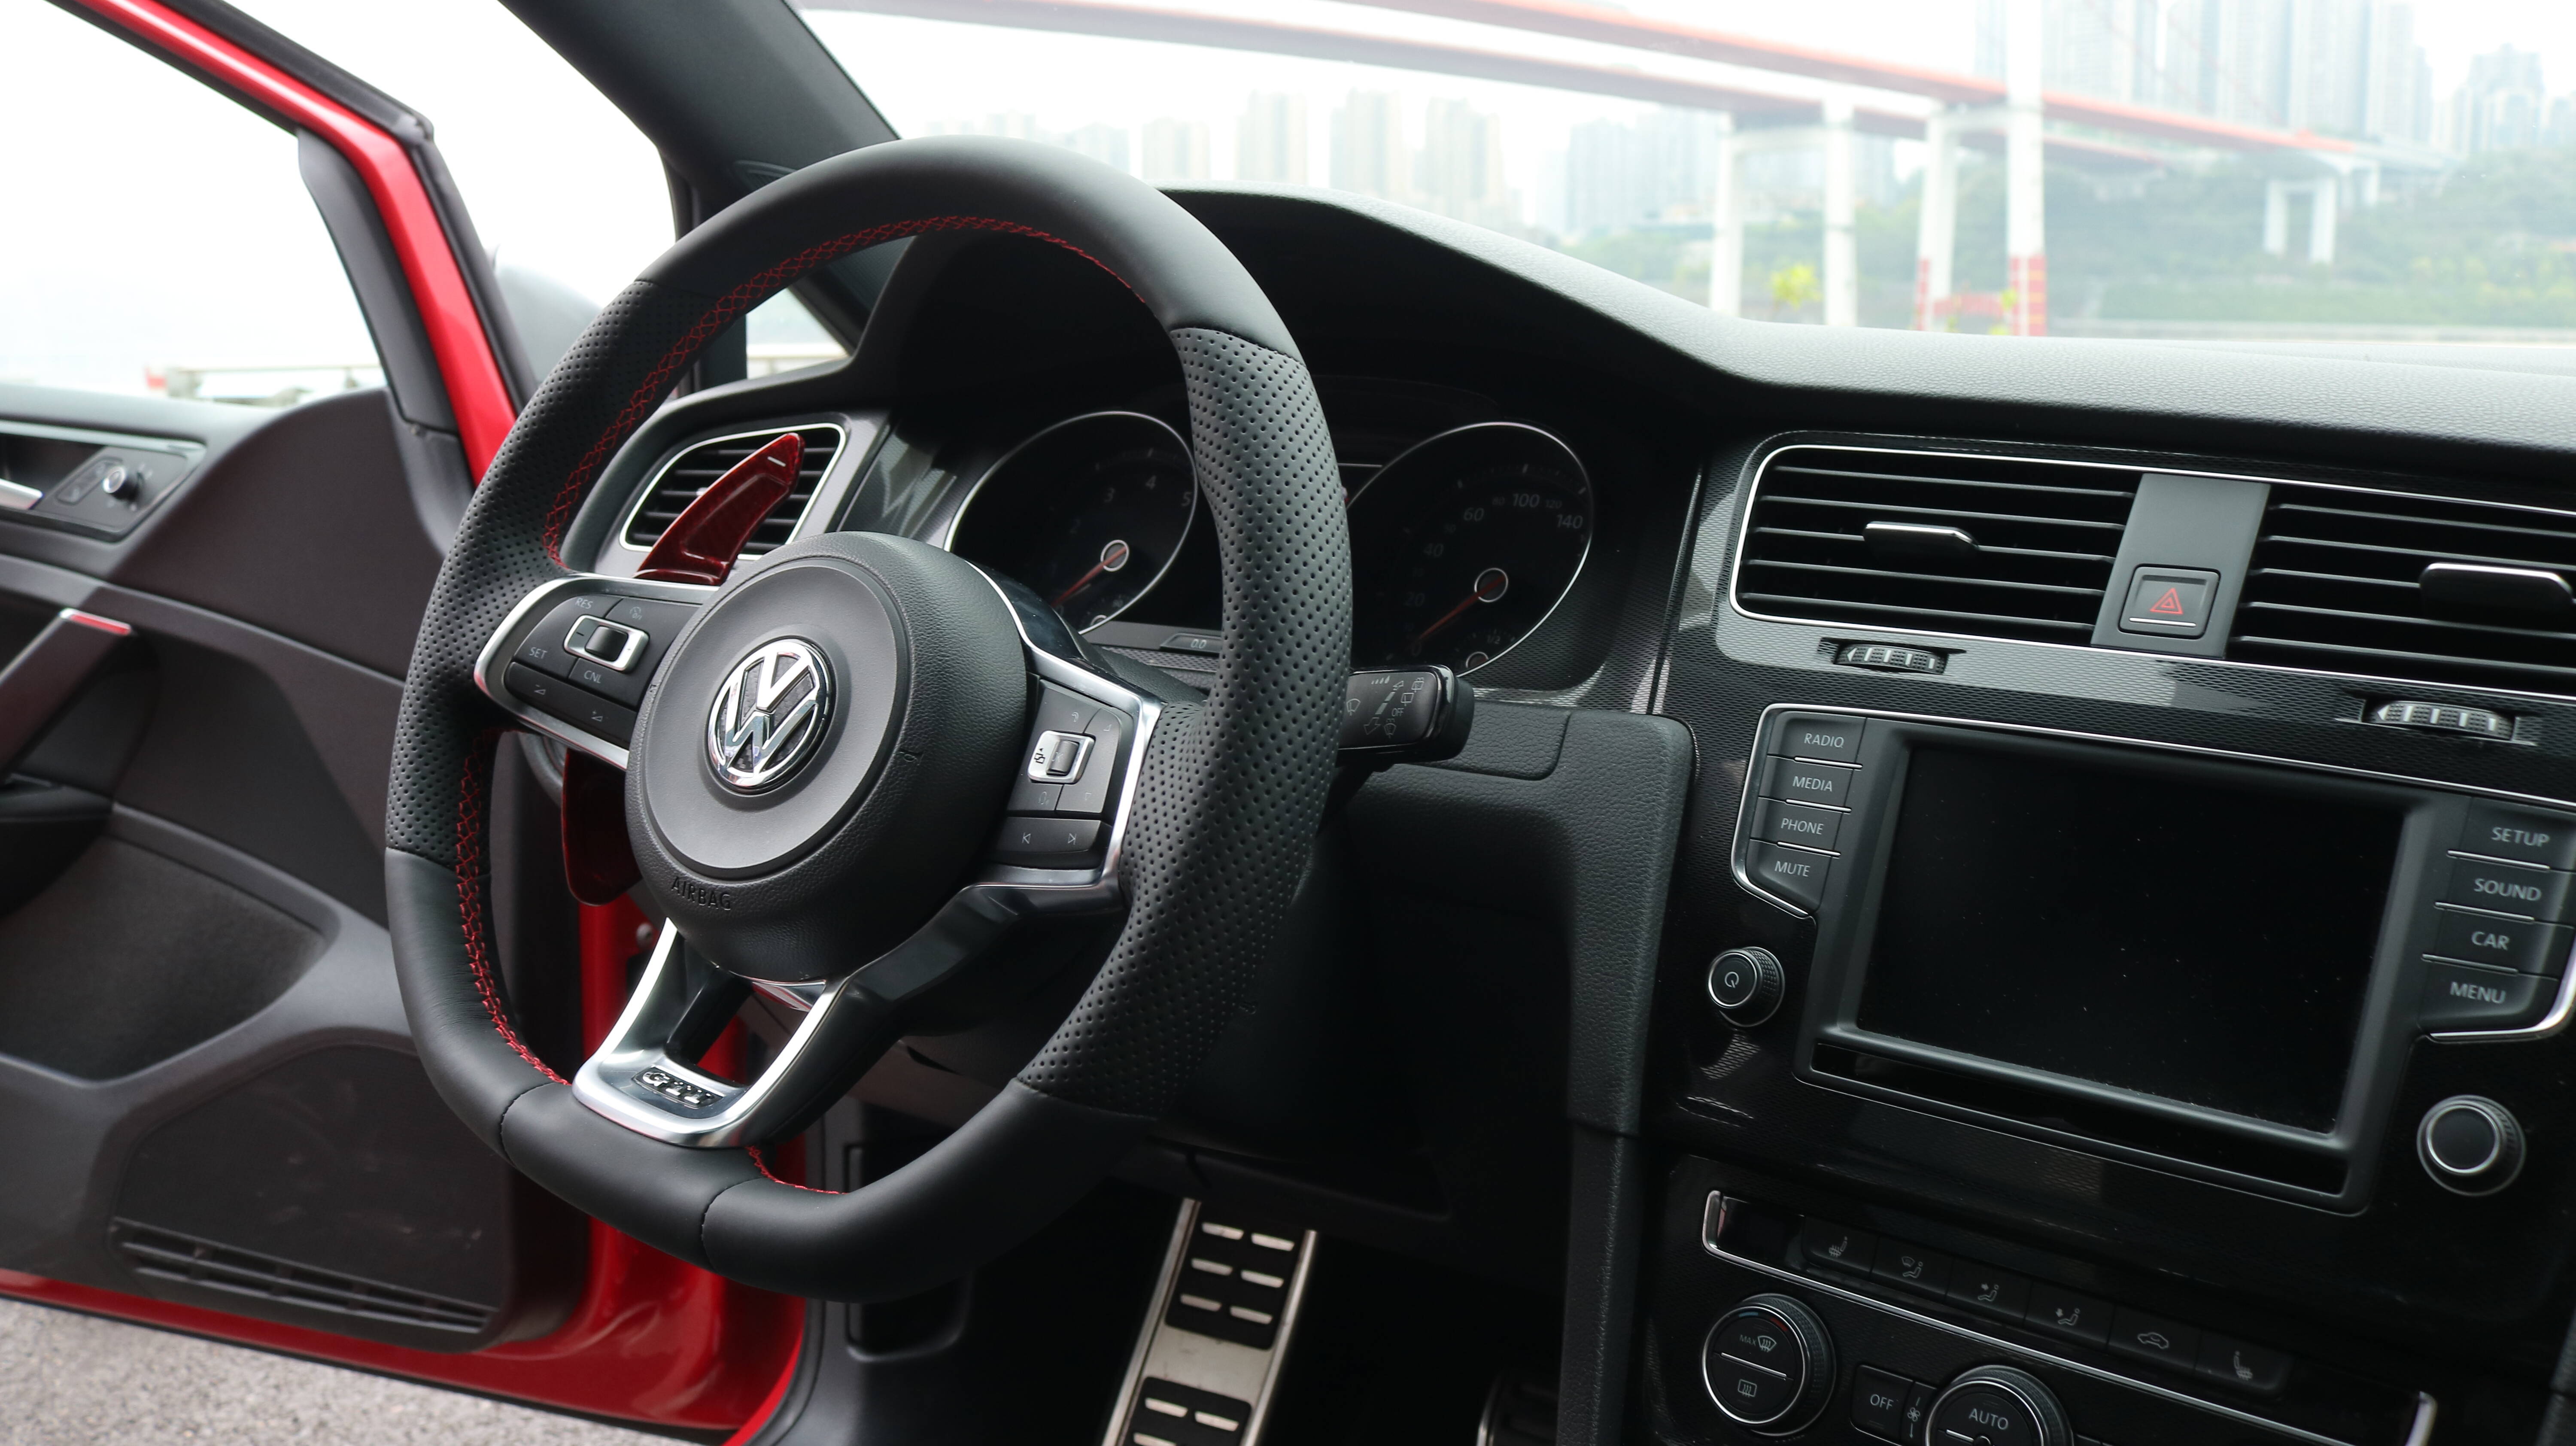 Why MEWANT is the Top Brand for Steering Wheel Covers